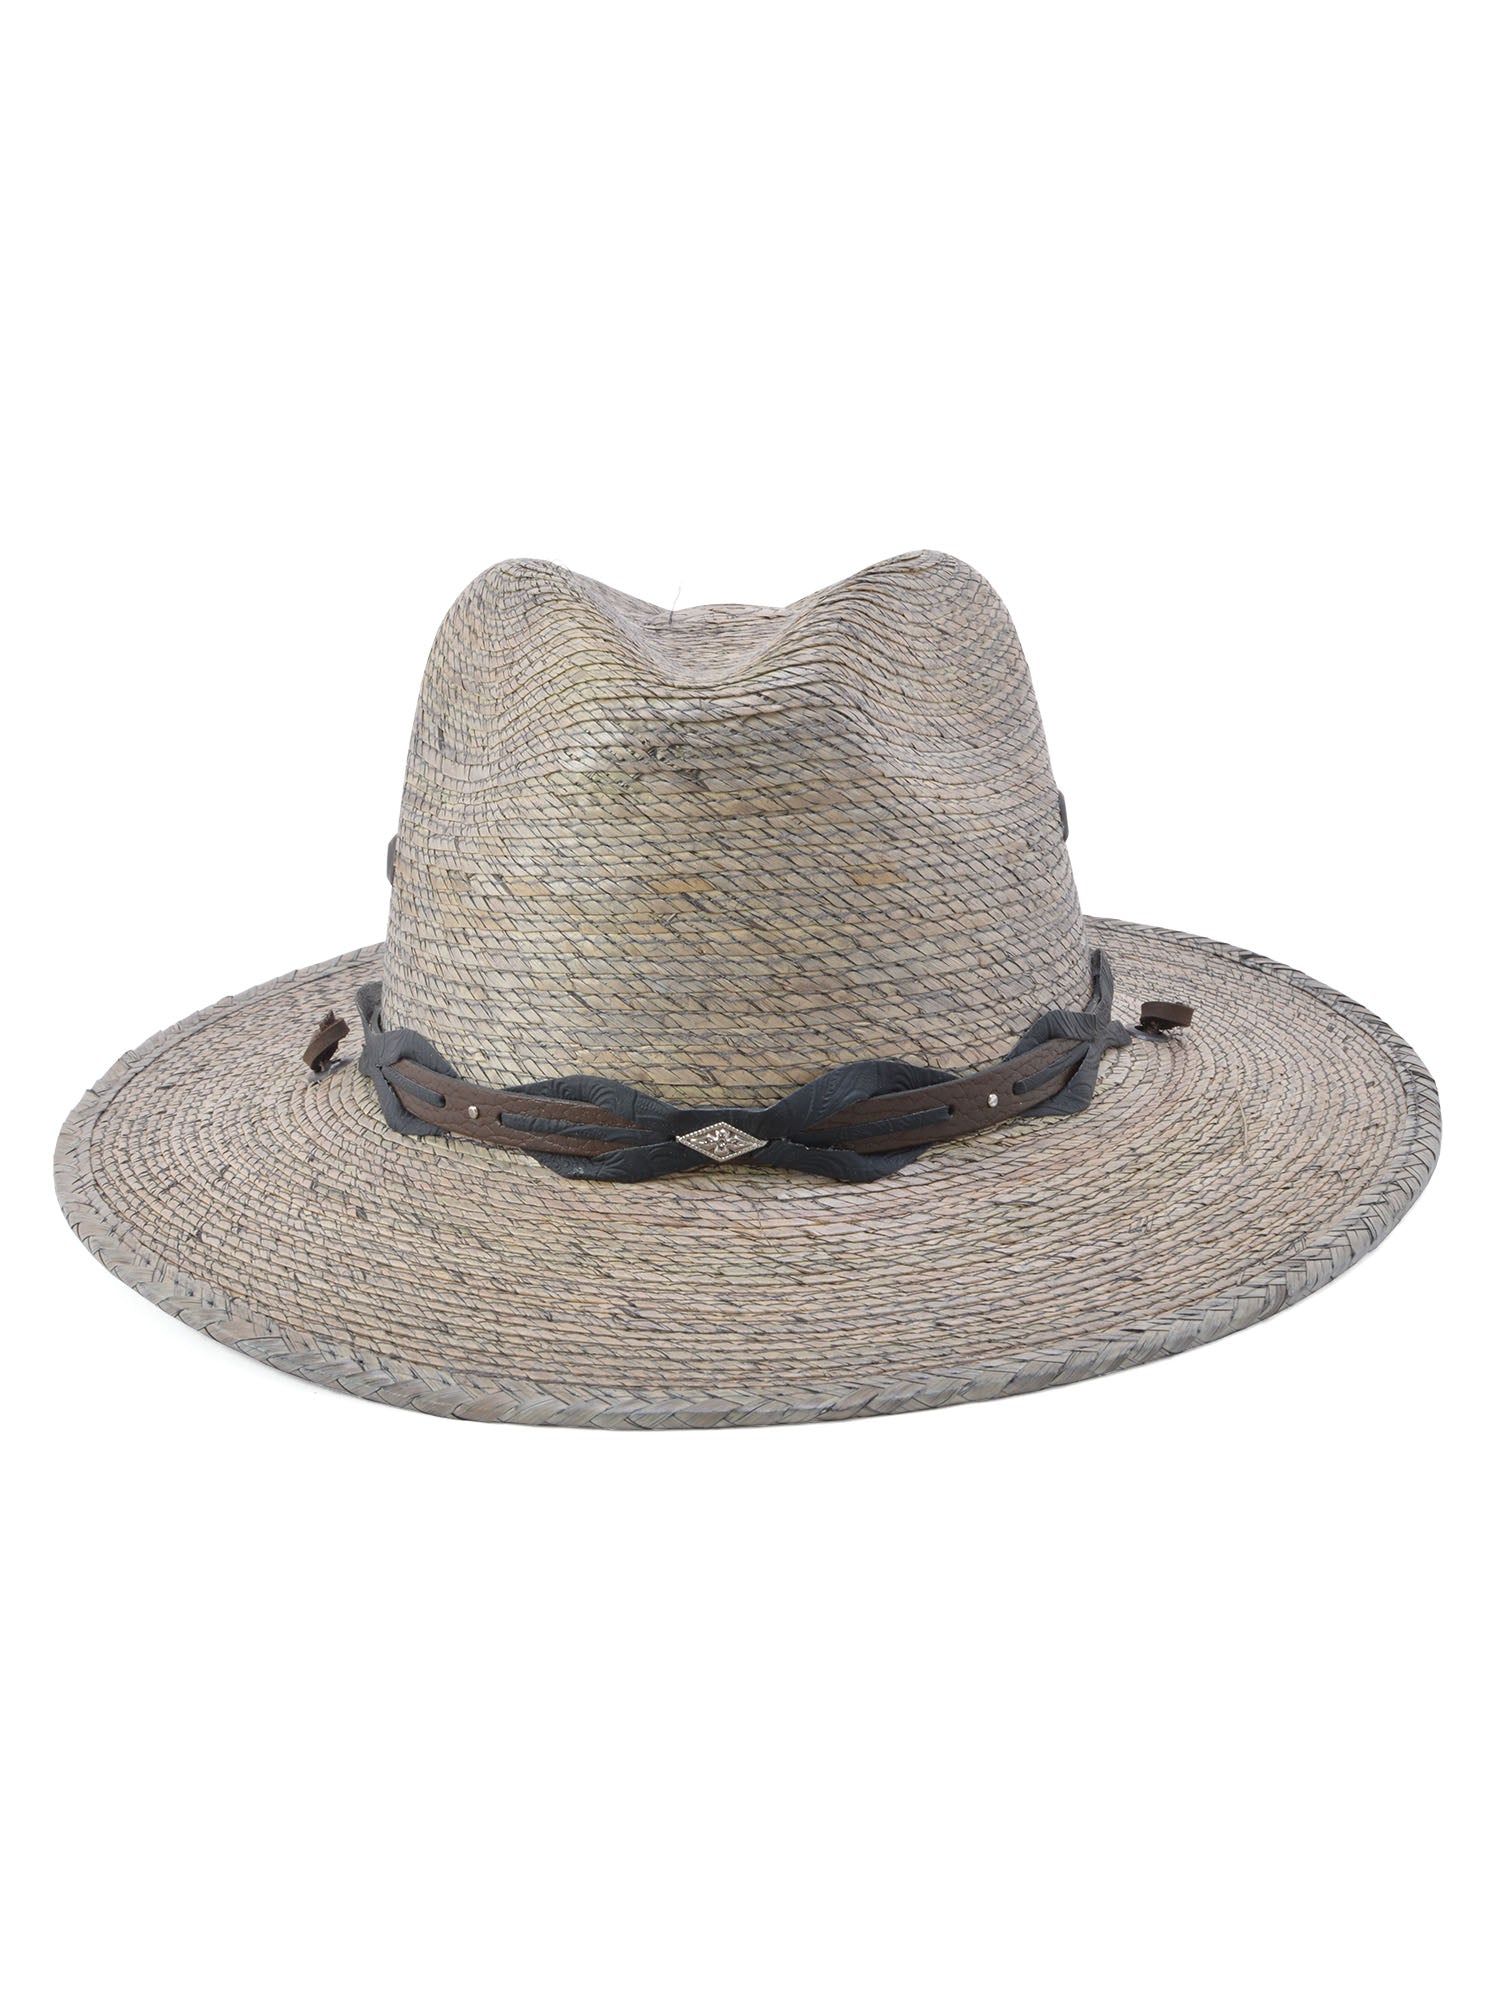 Stetson Marco Stained Palm Straw Hat - 0